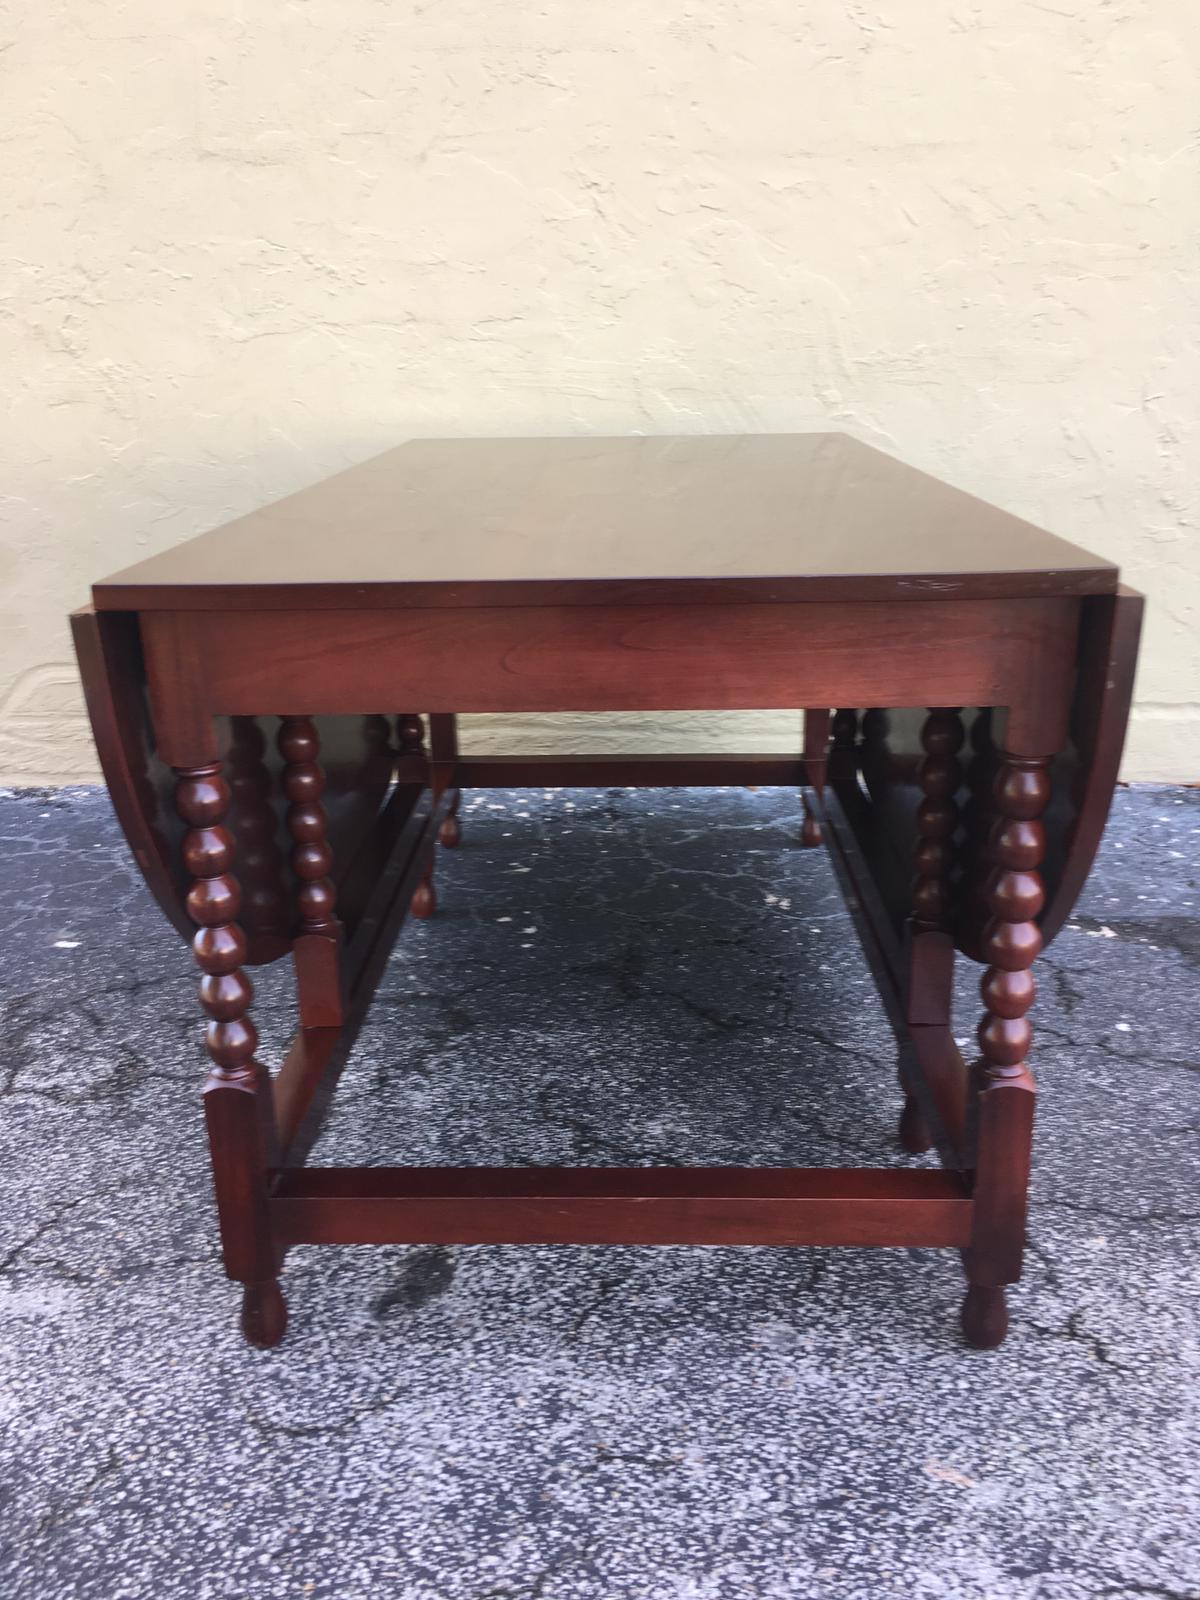 American Sheraton cherry table with a one board top, two scalloped drop leaves consisting of one board, interior supports, and terminating on acanthus carved legs, early 19th century
Measure: Table is 51.75 wide with leaves up and 24.25 wide with